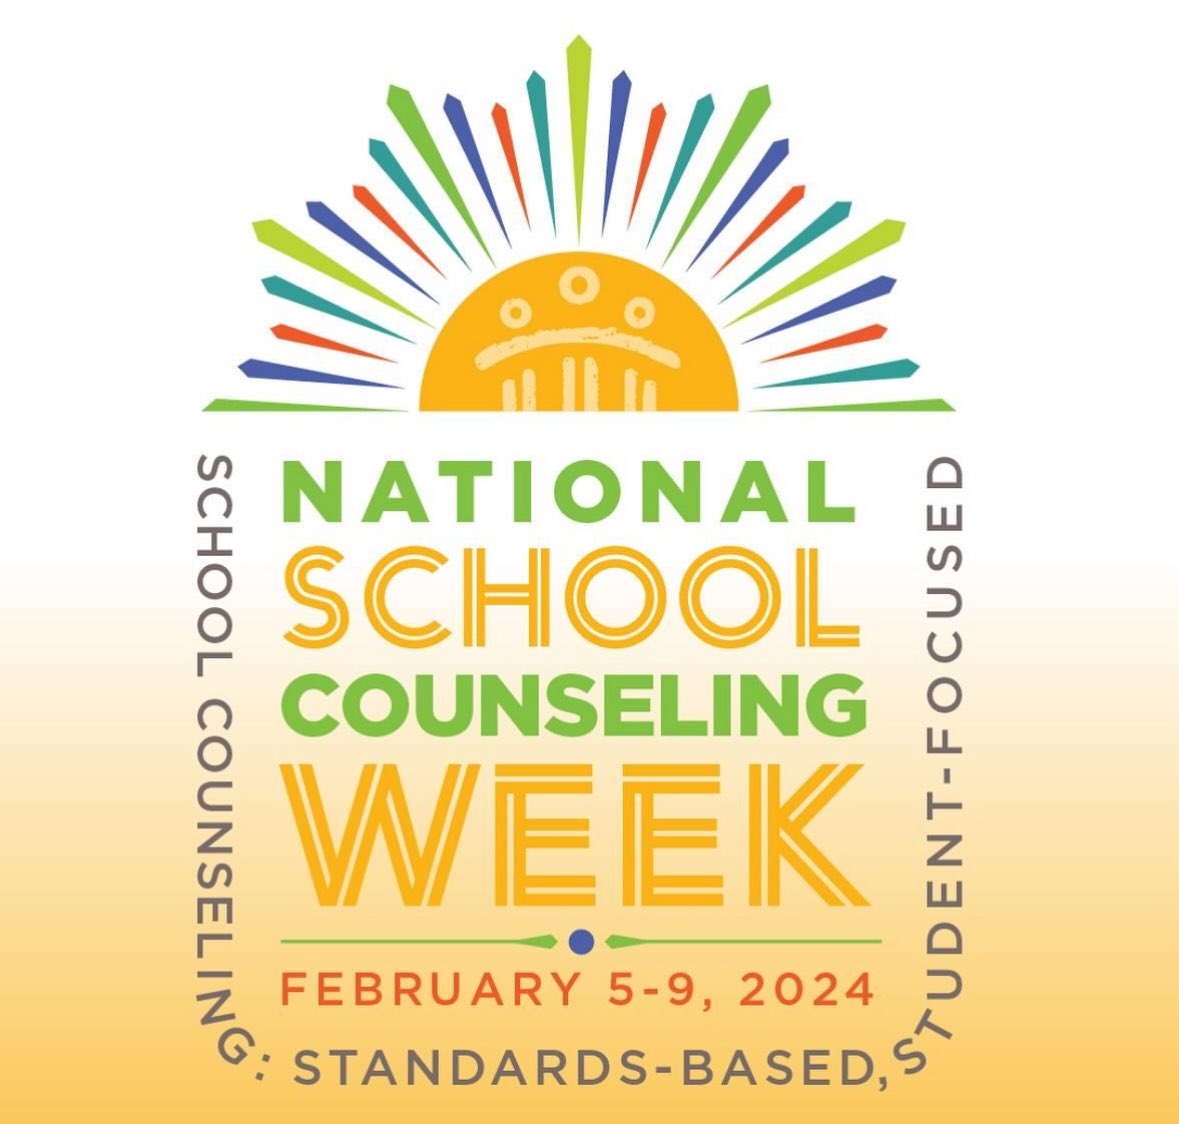 To say we have the best counseling staff at GHS would be an understatement! Thank you to our amazing counselors, social workers and psychologists who help our students, staff and families everyday! Happy National School Counselors Week! @GHillsGators @BristolCTSchool